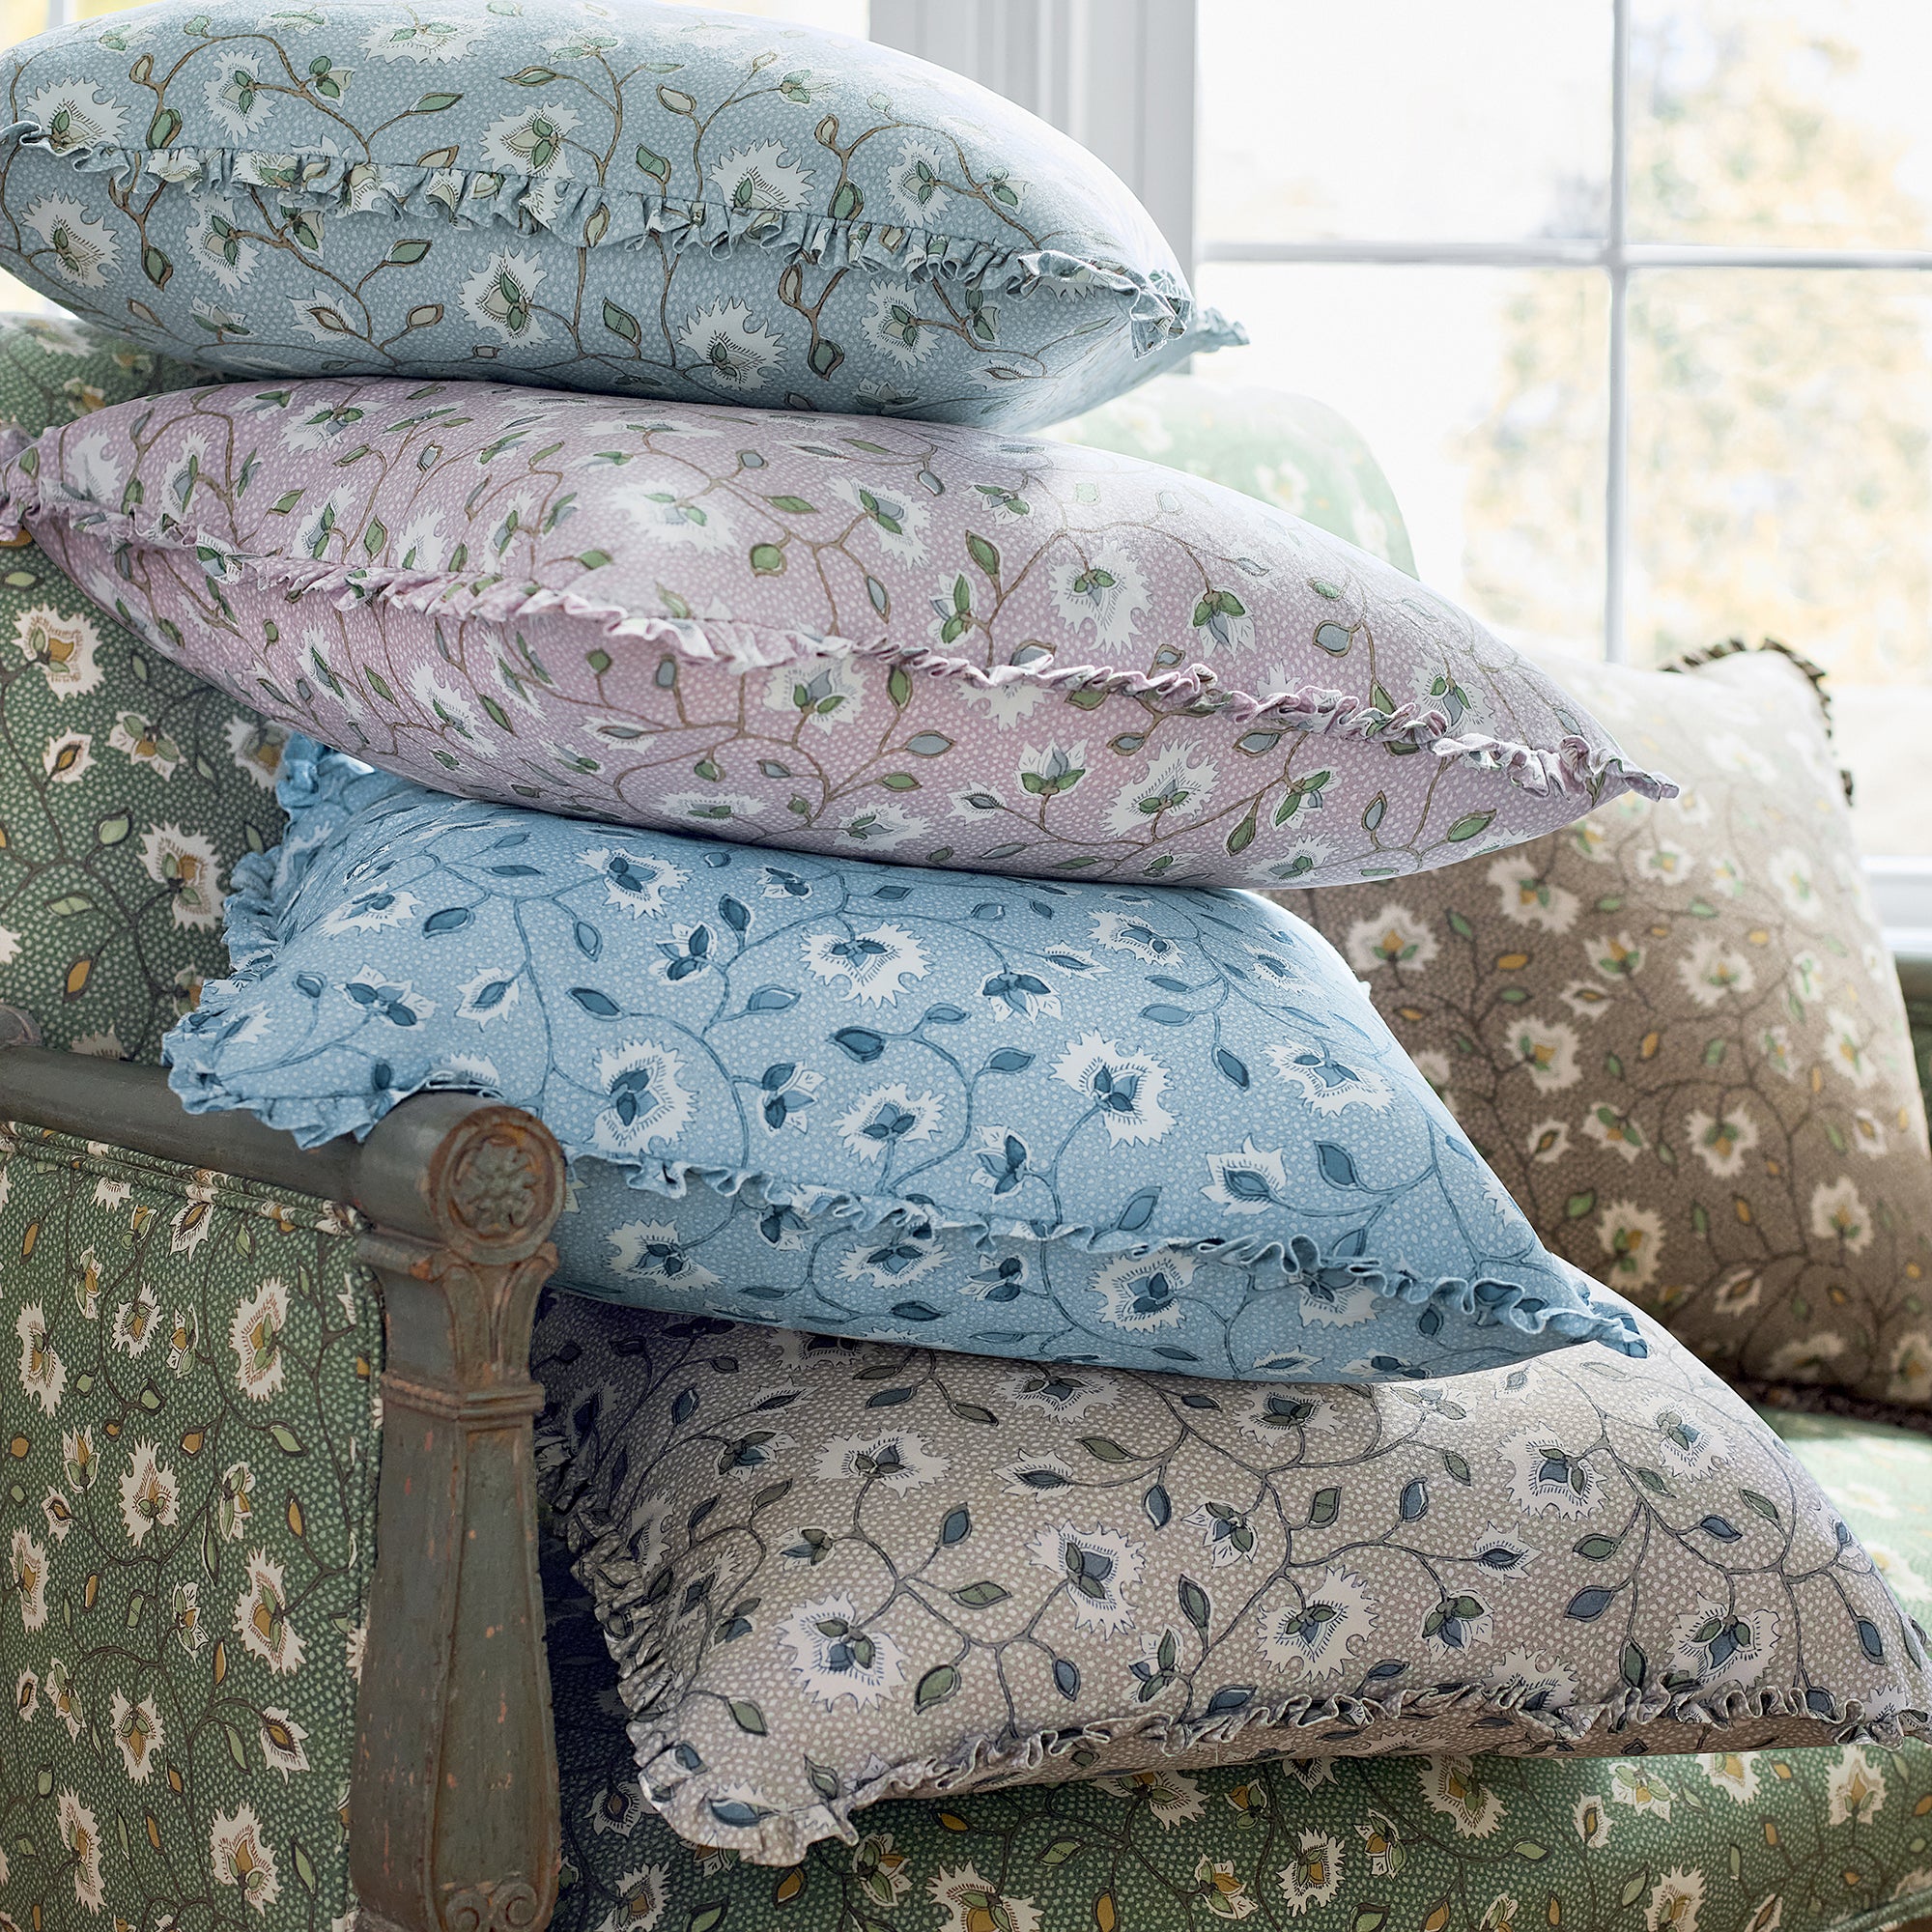 Collection of Settee and pillow fabrics in Chelsea printed fabric featuring slate and linen color fabric - pattern number AF57842 - by Anna French in the Bristol collection